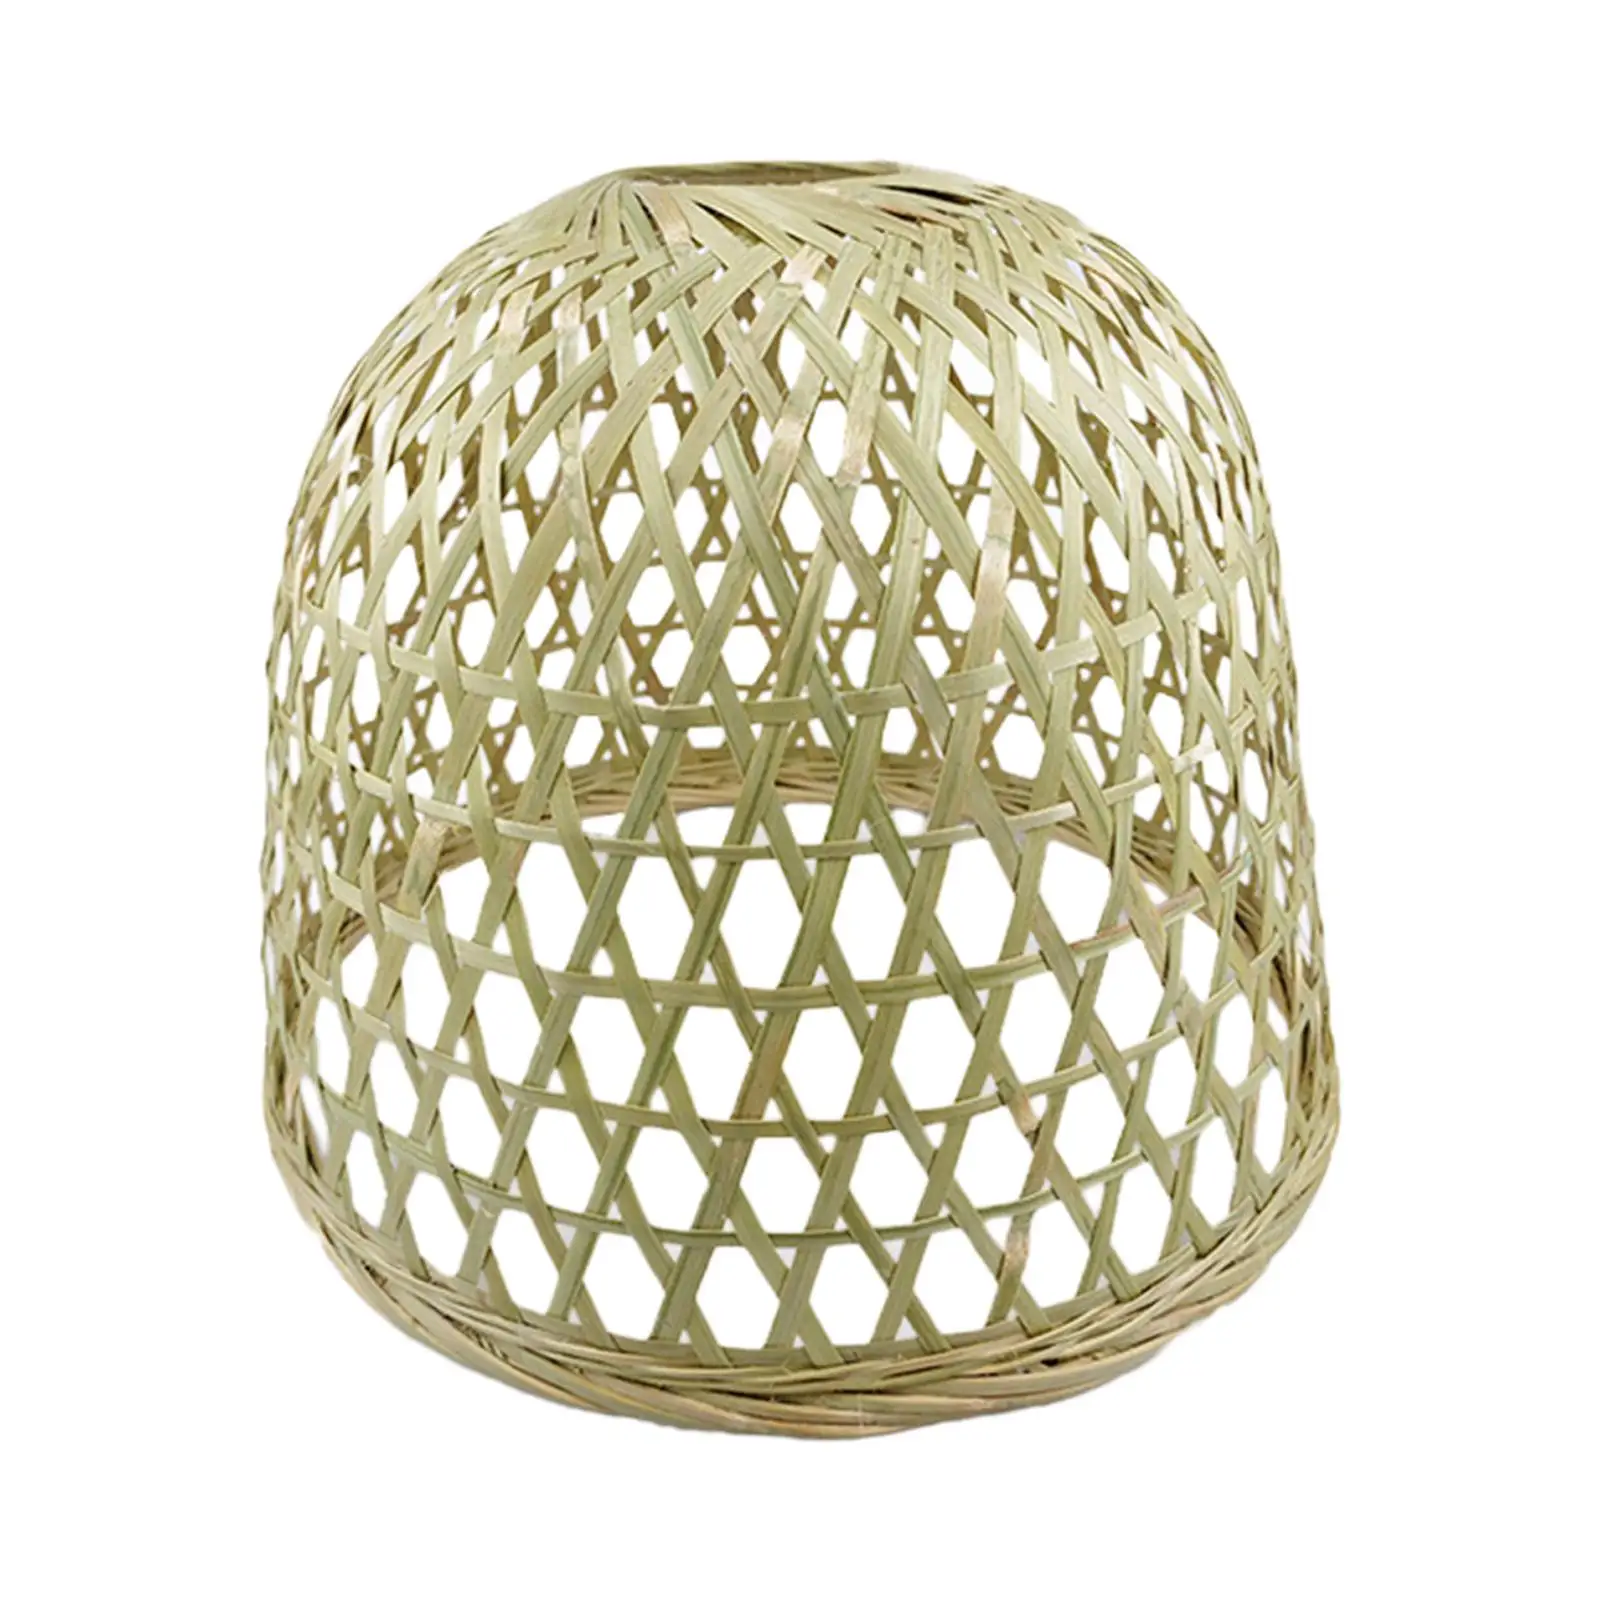 Natural Bamboo Lamp Shade Hanging Light Fixture Vintage Decoration Simple Minimalist Round Shaped Basket for Kitchen Island Cafe